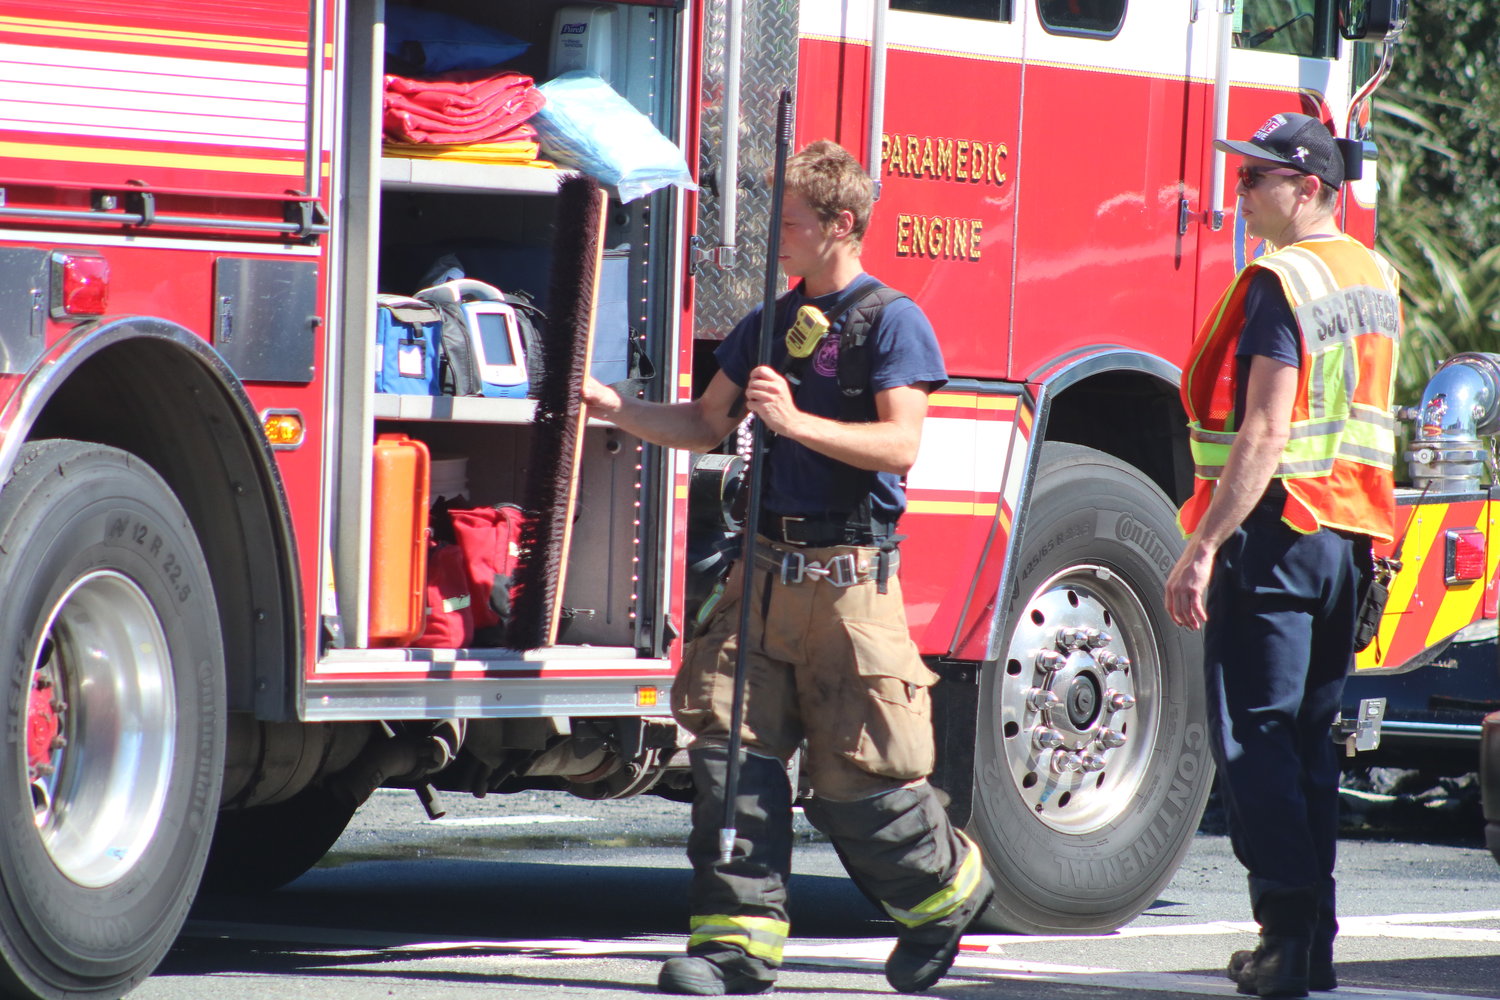 Firefighters pack up supplies following the incident.